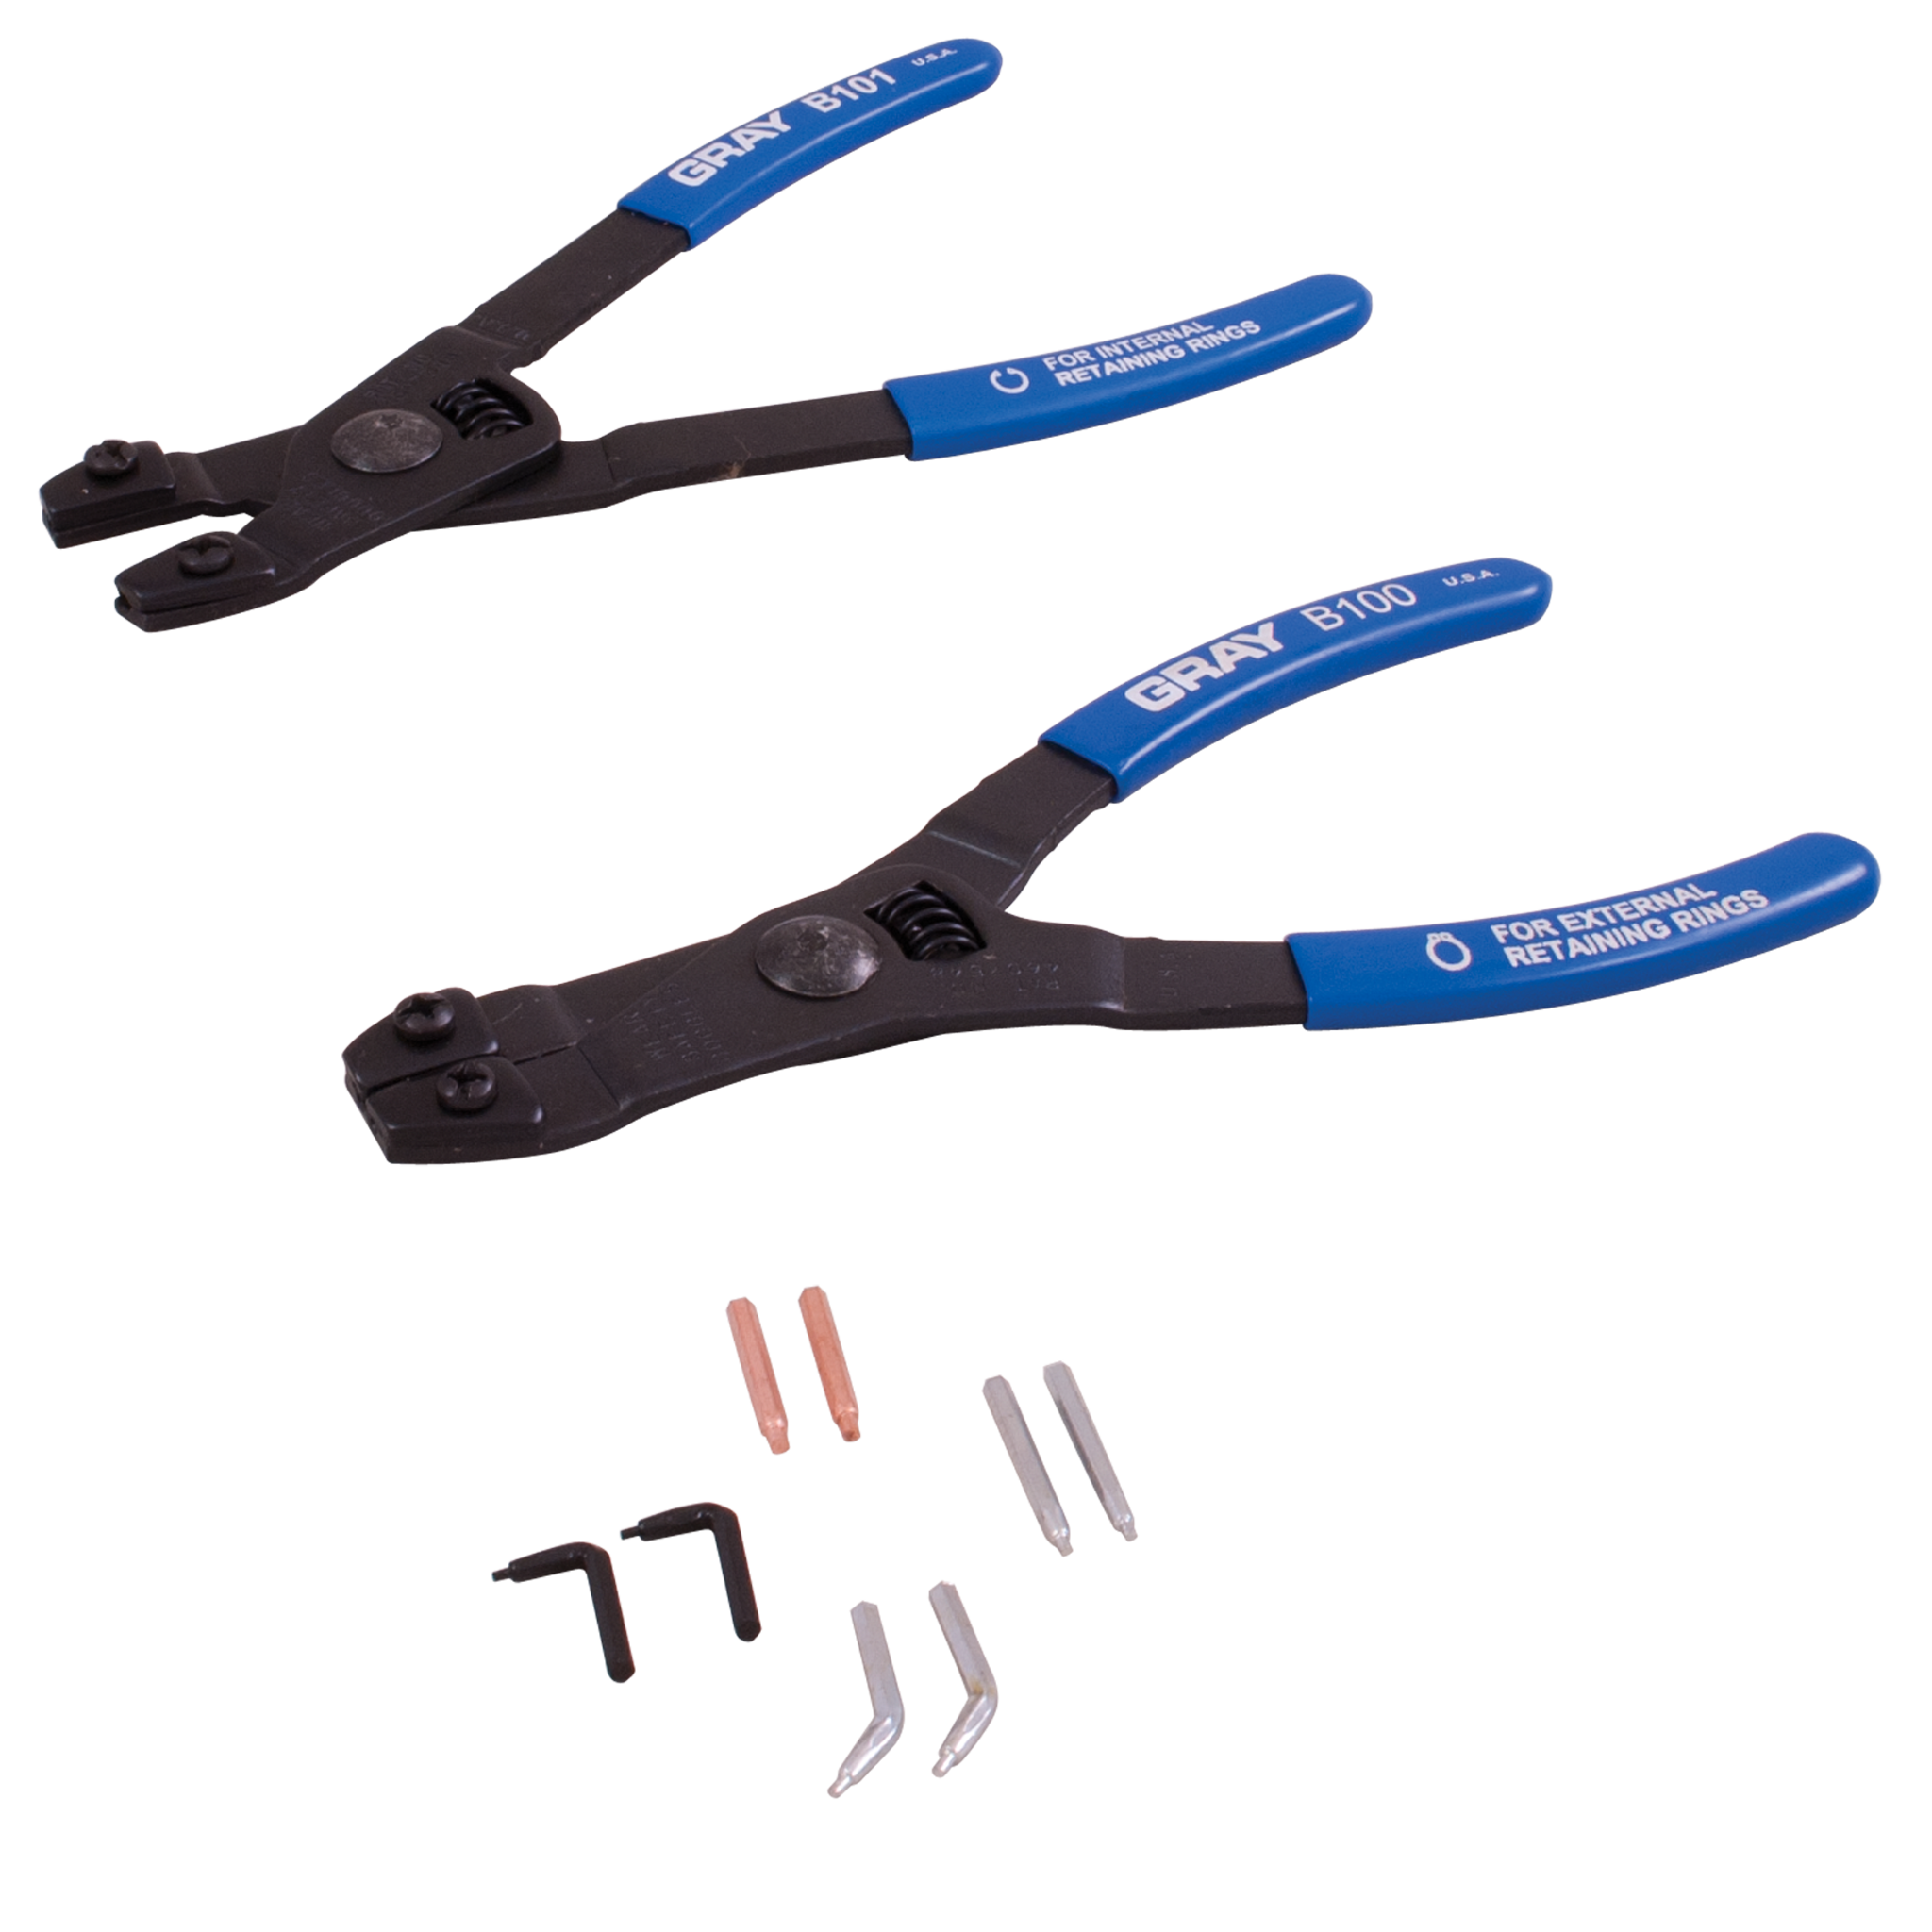 3 Piece Internal and External Retaining Ring Plier Set with Replaceable Tips